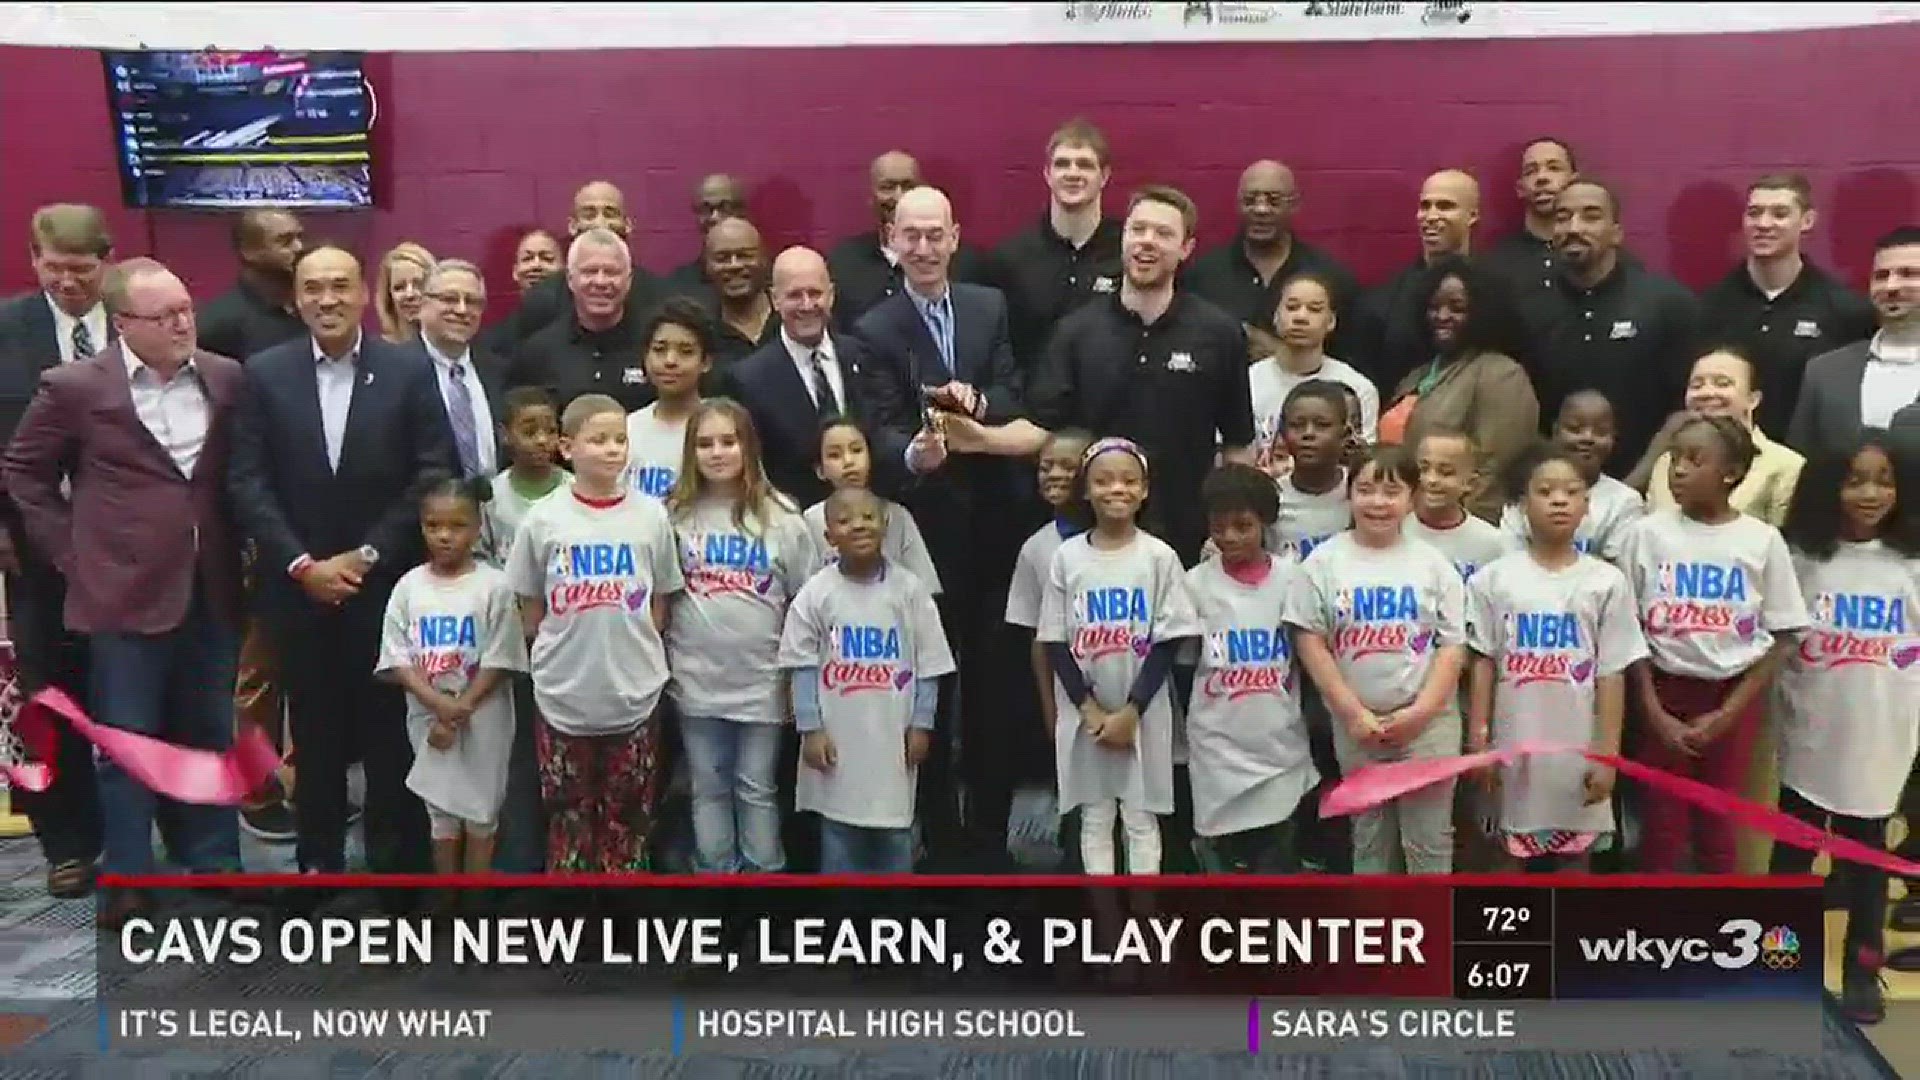 Cavs open new live, learn and play center